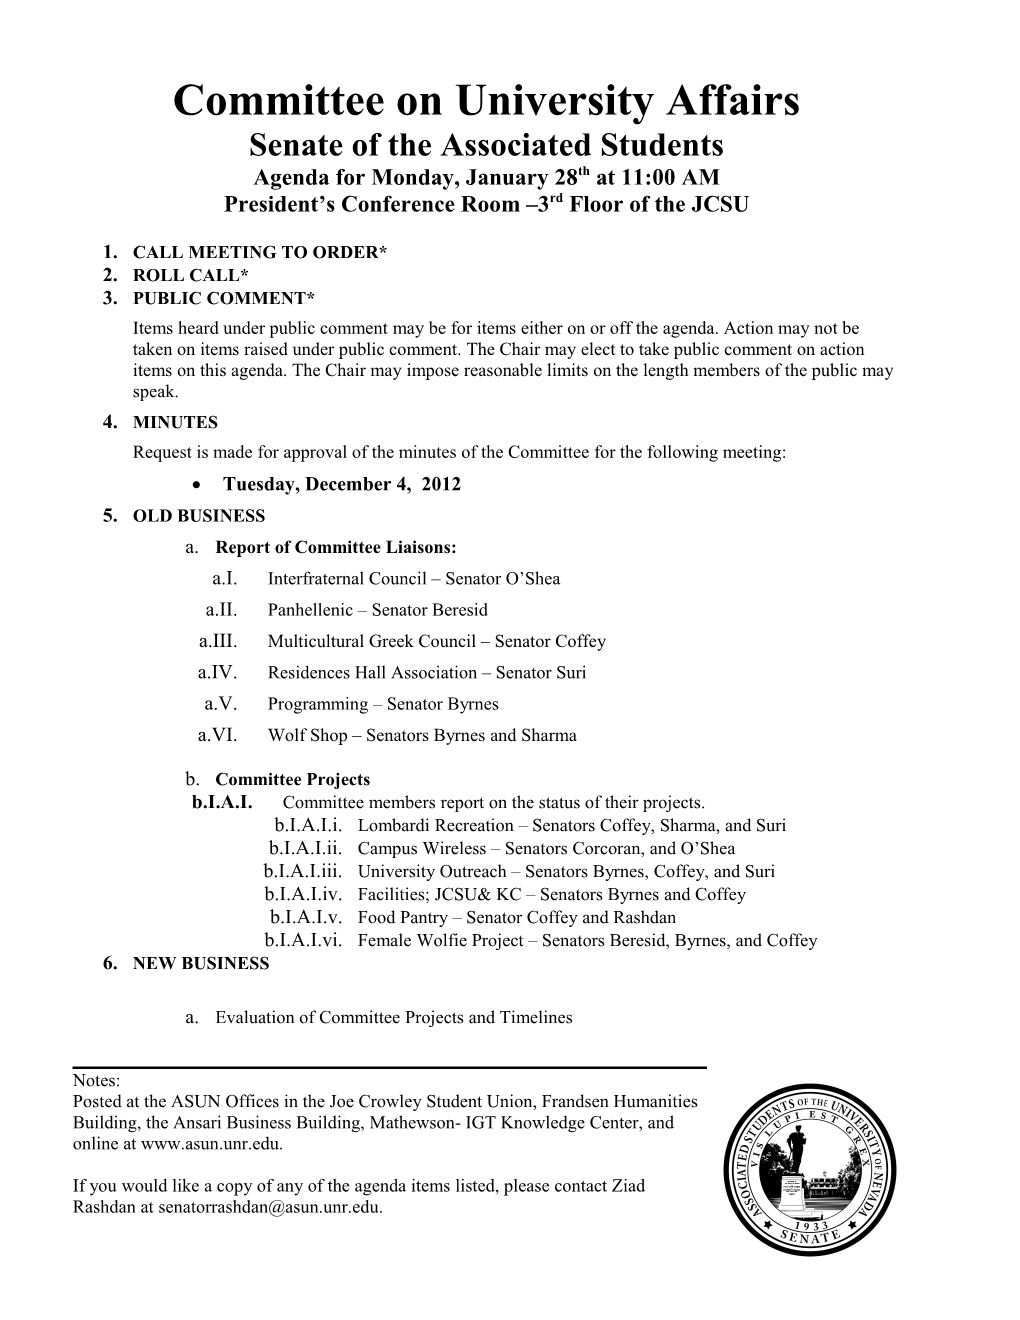 Committee on Conduct and Appointments Agenda for April 23, 2008